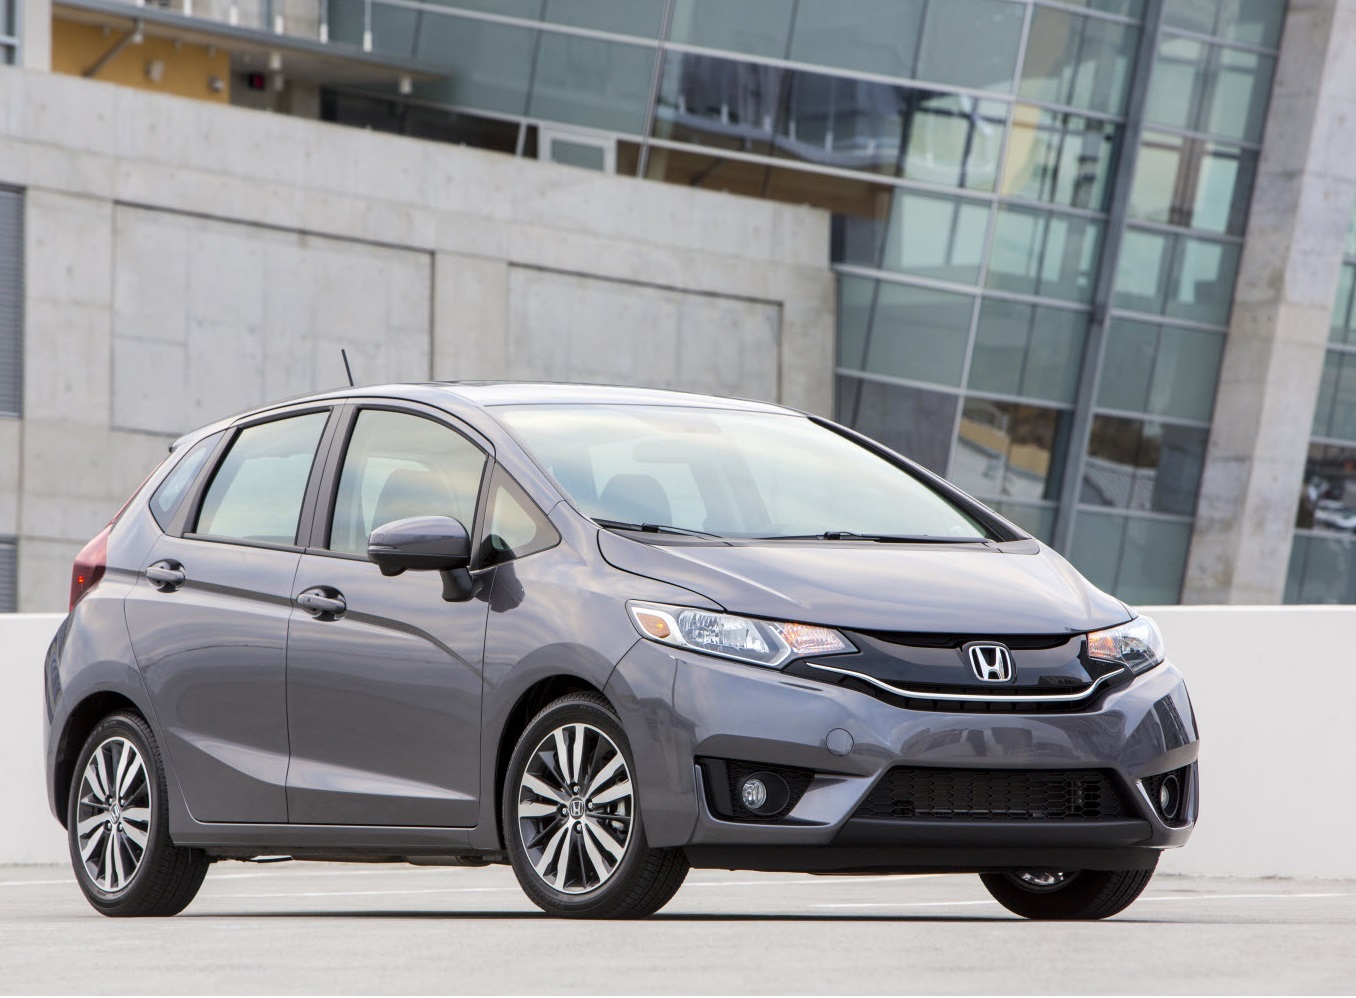 2015 Honda Fit EX-L With Navigation Review | PCMag